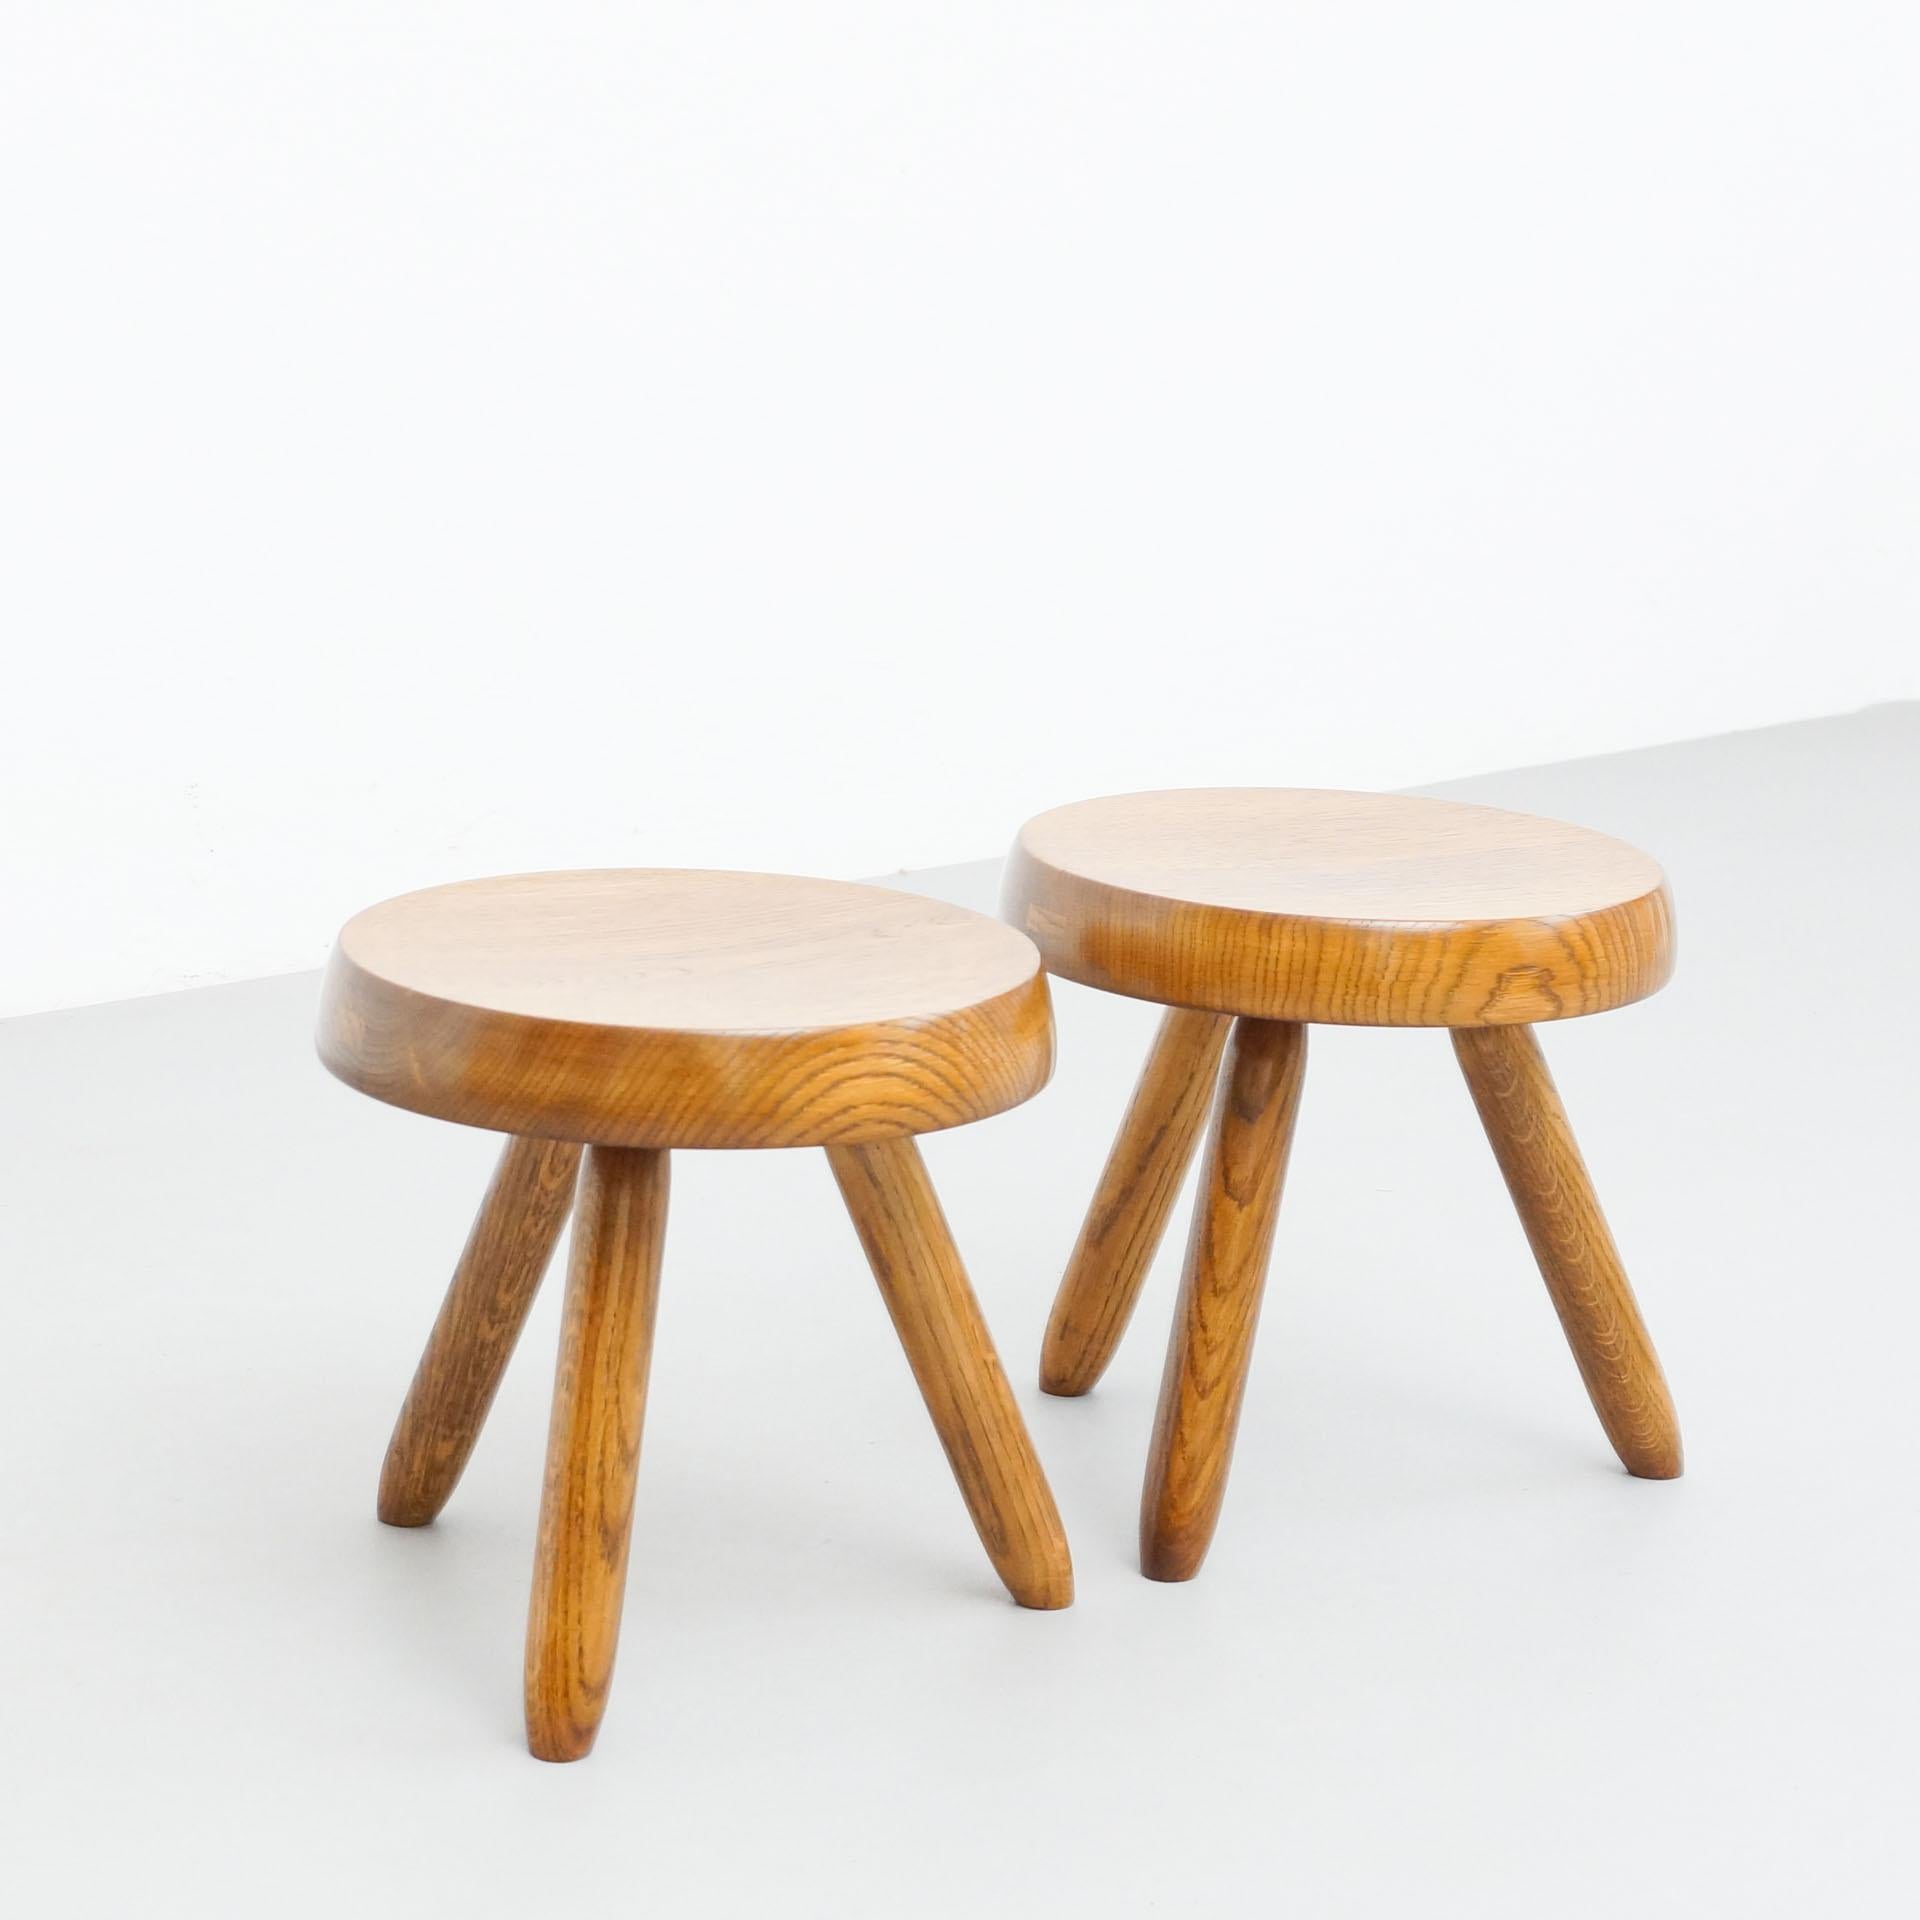 Stools designed in the style of Charlotte Perriand.
Made by unknown manufacturer.

In good original condition, preserving a beautiful patina, with minor wear consistent with age and use. 

Materials:
Wood

Dimensions:
31 D cm x 31 W cm x